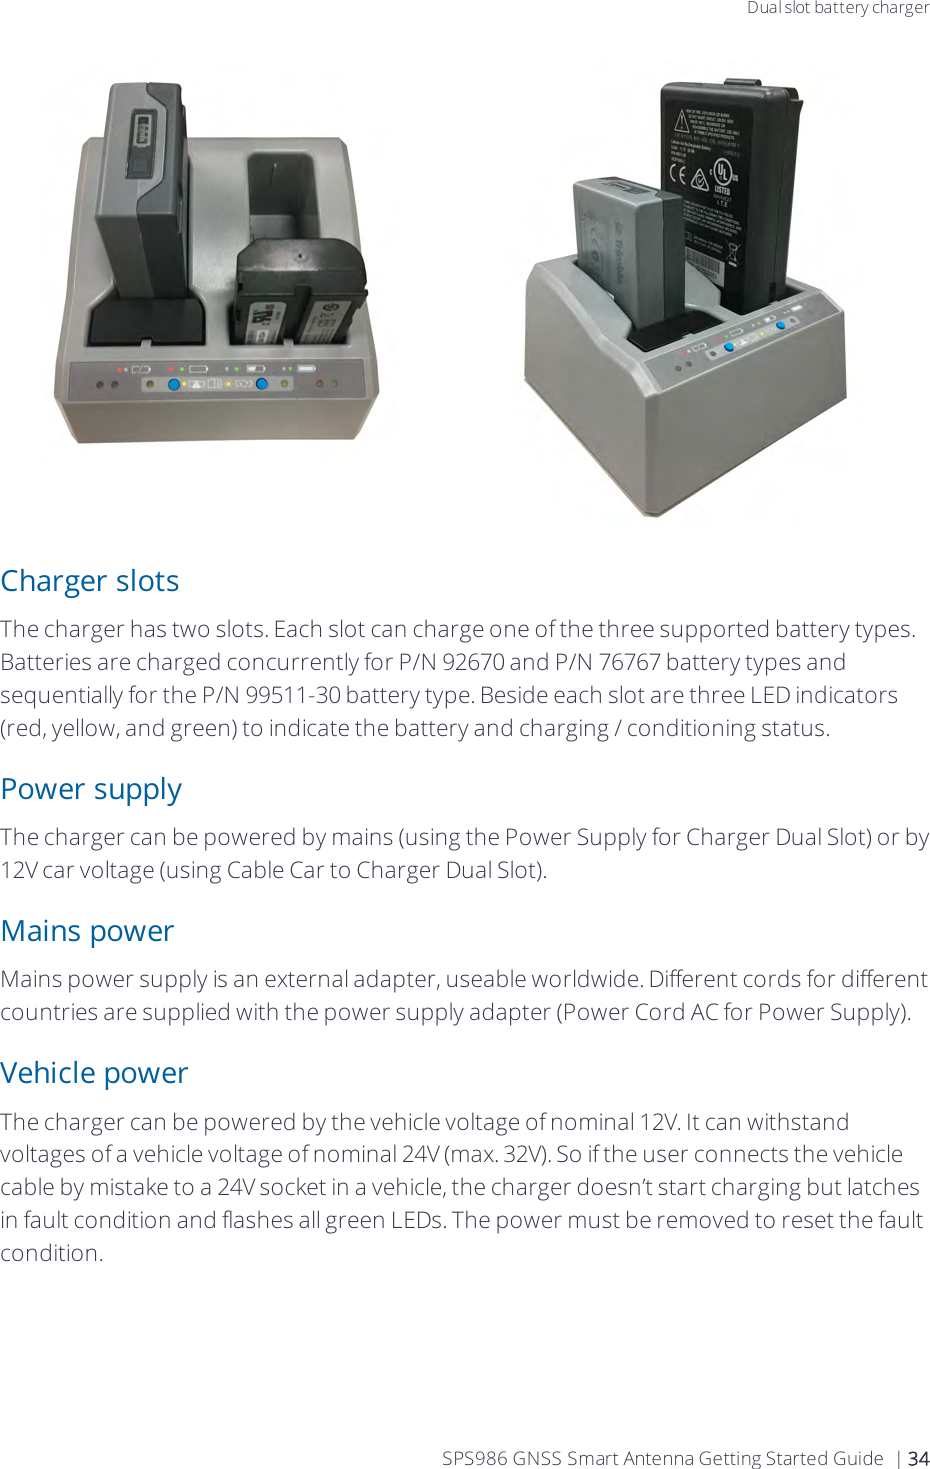 Dual slot battery chargerCharger slotsThe charger has two slots. Each slot can charge one of the three supported battery types. Batteries are charged concurrently for P/N 92670 and P/N 76767 battery types and sequentially for the P/N 99511-30 battery type. Beside each slot are three LED indicators (red, yellow, and green) to indicate the battery and charging / conditioning status.Power supplyThe charger can be powered by mains (using the Power Supply for Charger Dual Slot) or by 12V car voltage (using Cable Car to Charger Dual Slot).Mains powerMains power supply is an external adapter, useable worldwide. Different cords for different countries are supplied with the power supply adapter (Power Cord AC for Power Supply).Vehicle powerThe charger can be powered by the vehicle voltage of nominal 12V. It can withstand voltages of a vehicle voltage of nominal 24V (max. 32V). So if the user connects the vehicle cable by mistake to a 24V socket in a vehicle, the charger doesn’t start charging but latches in fault condition and flashes all green LEDs. The power must be removed to reset the fault condition.SPS986 GNSS Smart Antenna Getting Started Guide | 34